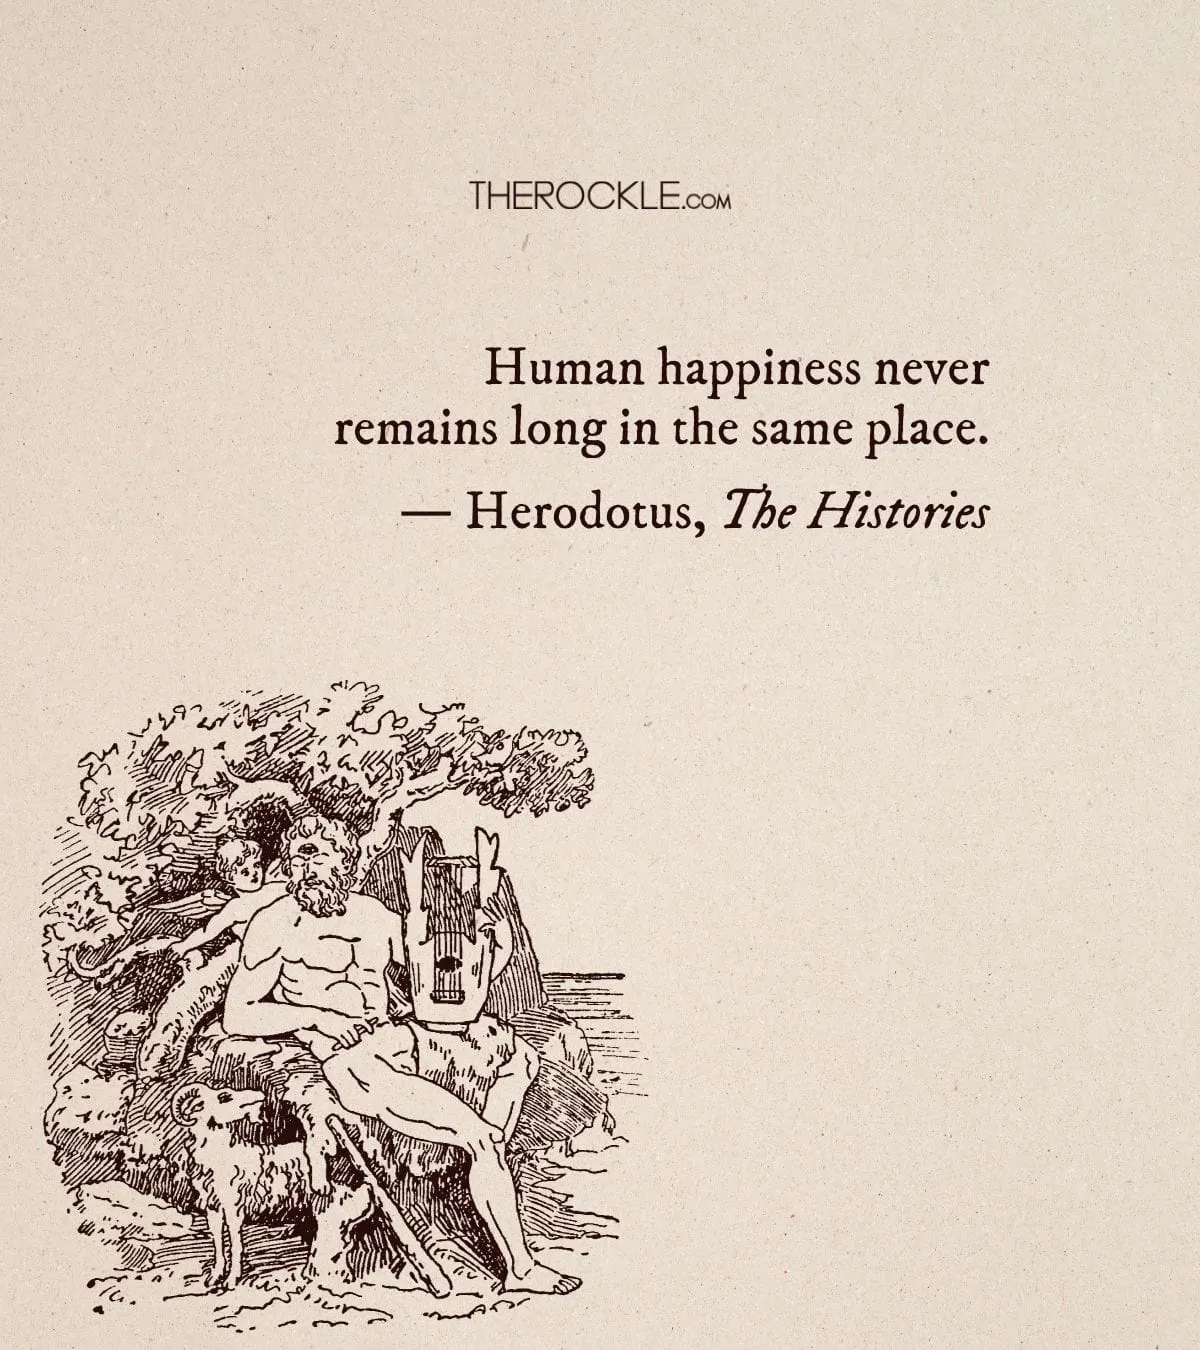 Herodotus quote from The Histories on the fickleness of happiness